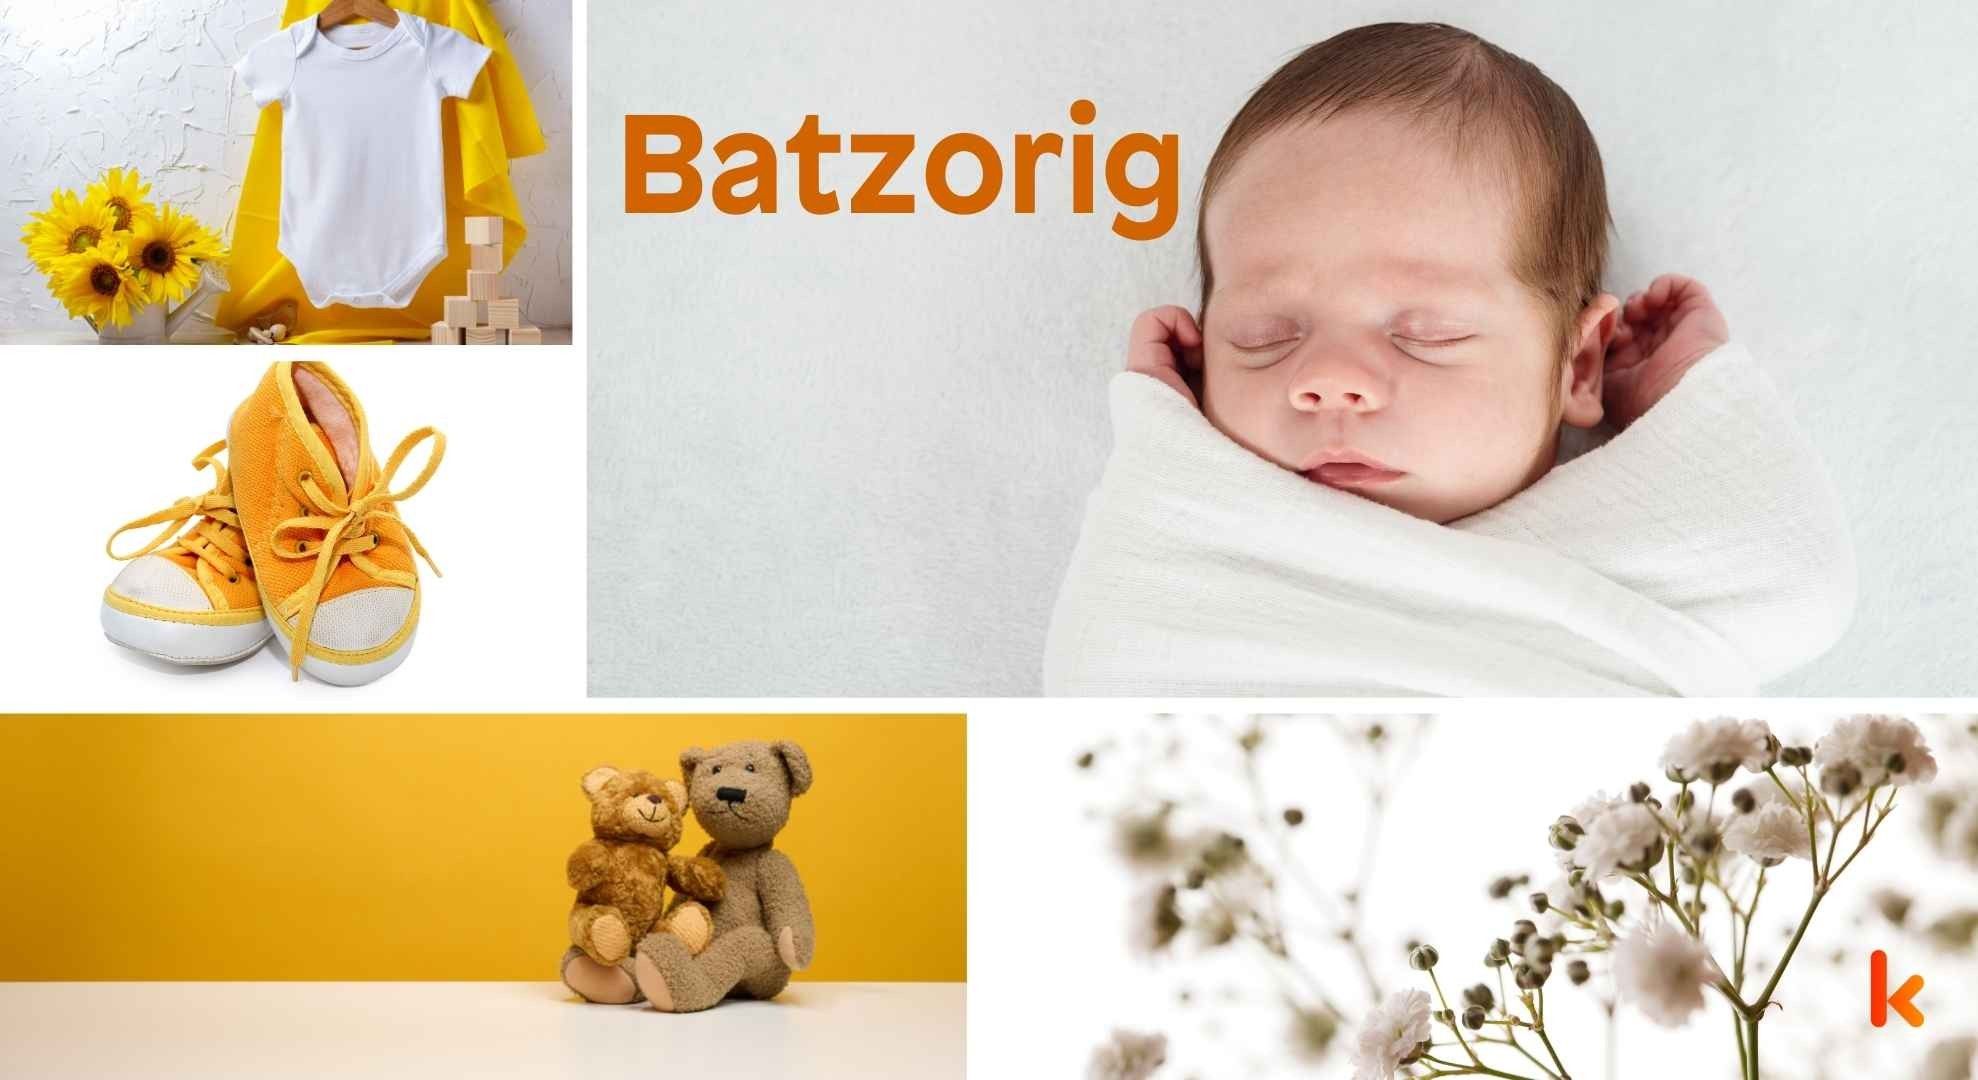 Meaning of the name Batzorig